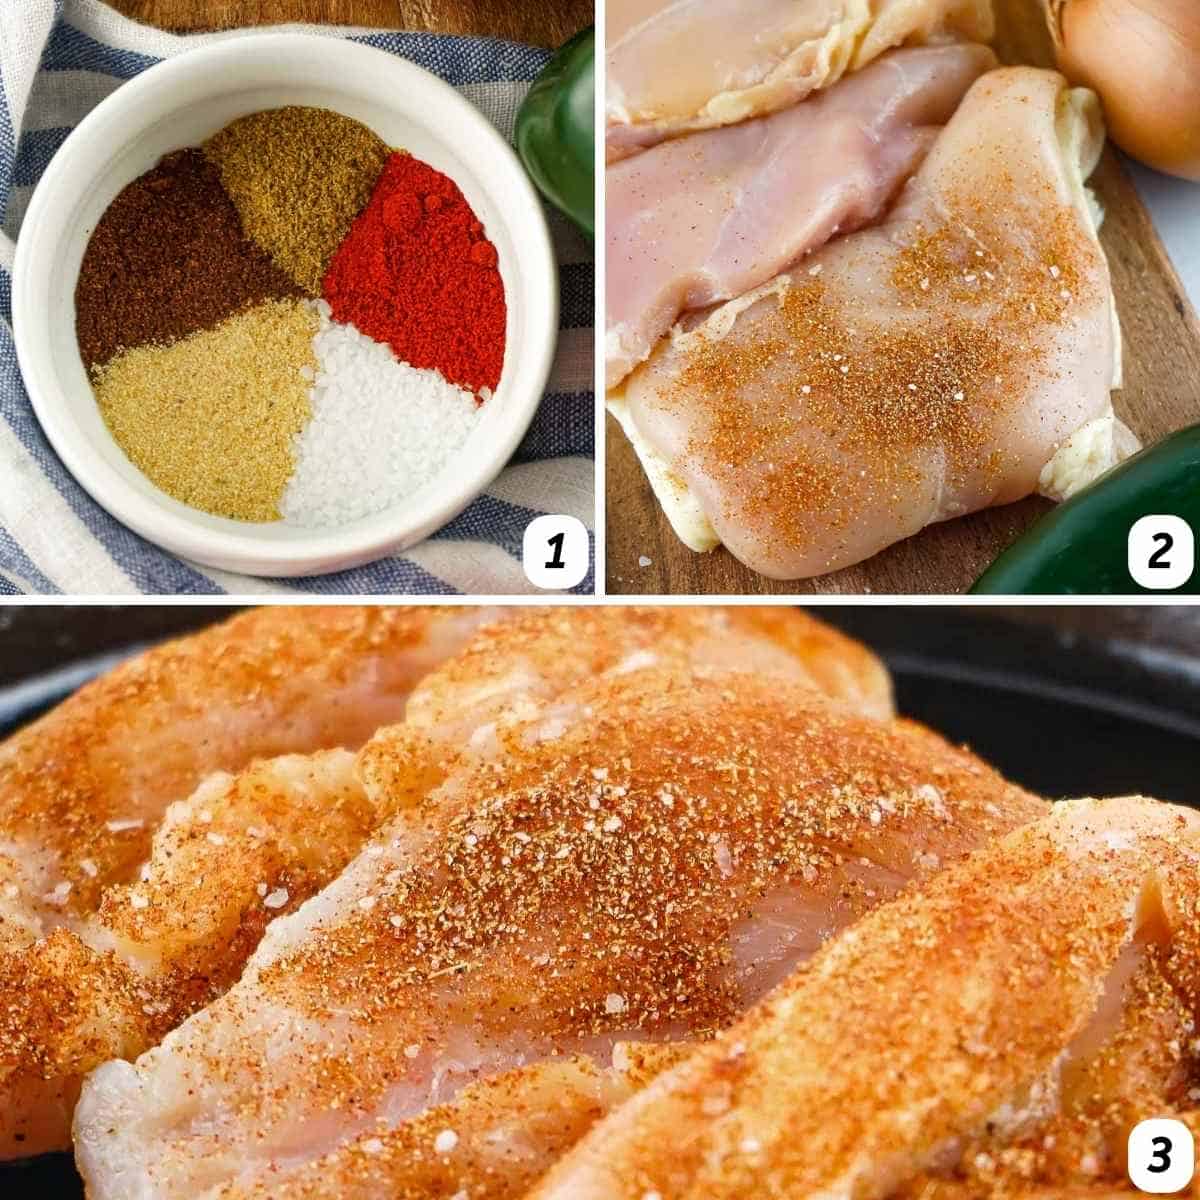 Three panel grid of process shots 1-3 - making the spice mixture, prepping chicken breasts, and coating chicken with spices.